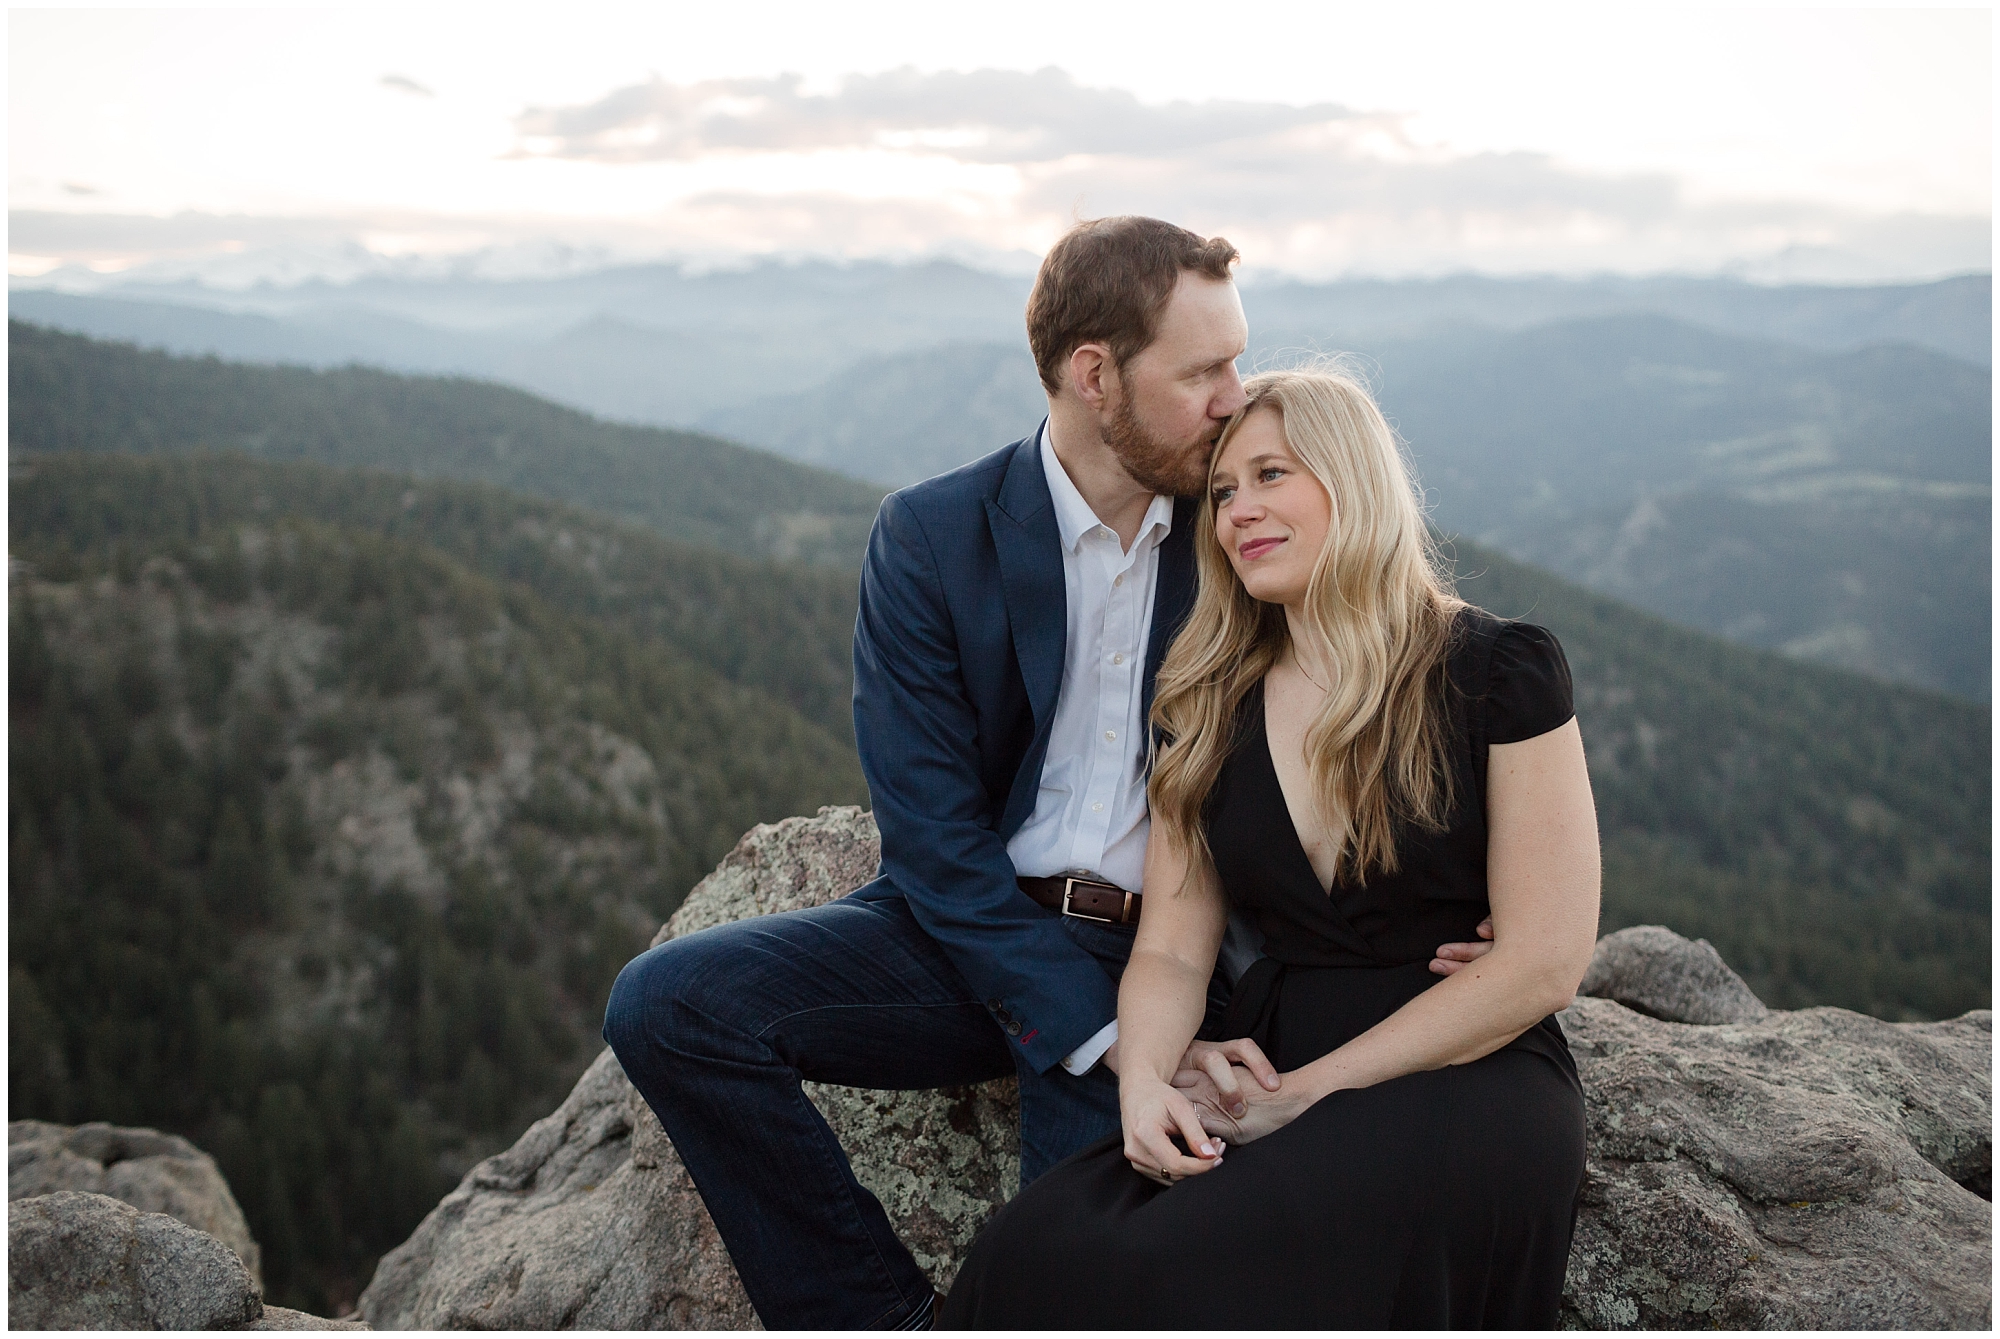 Couple sits together on the rocks during their Colorado mountain engagement photographer.